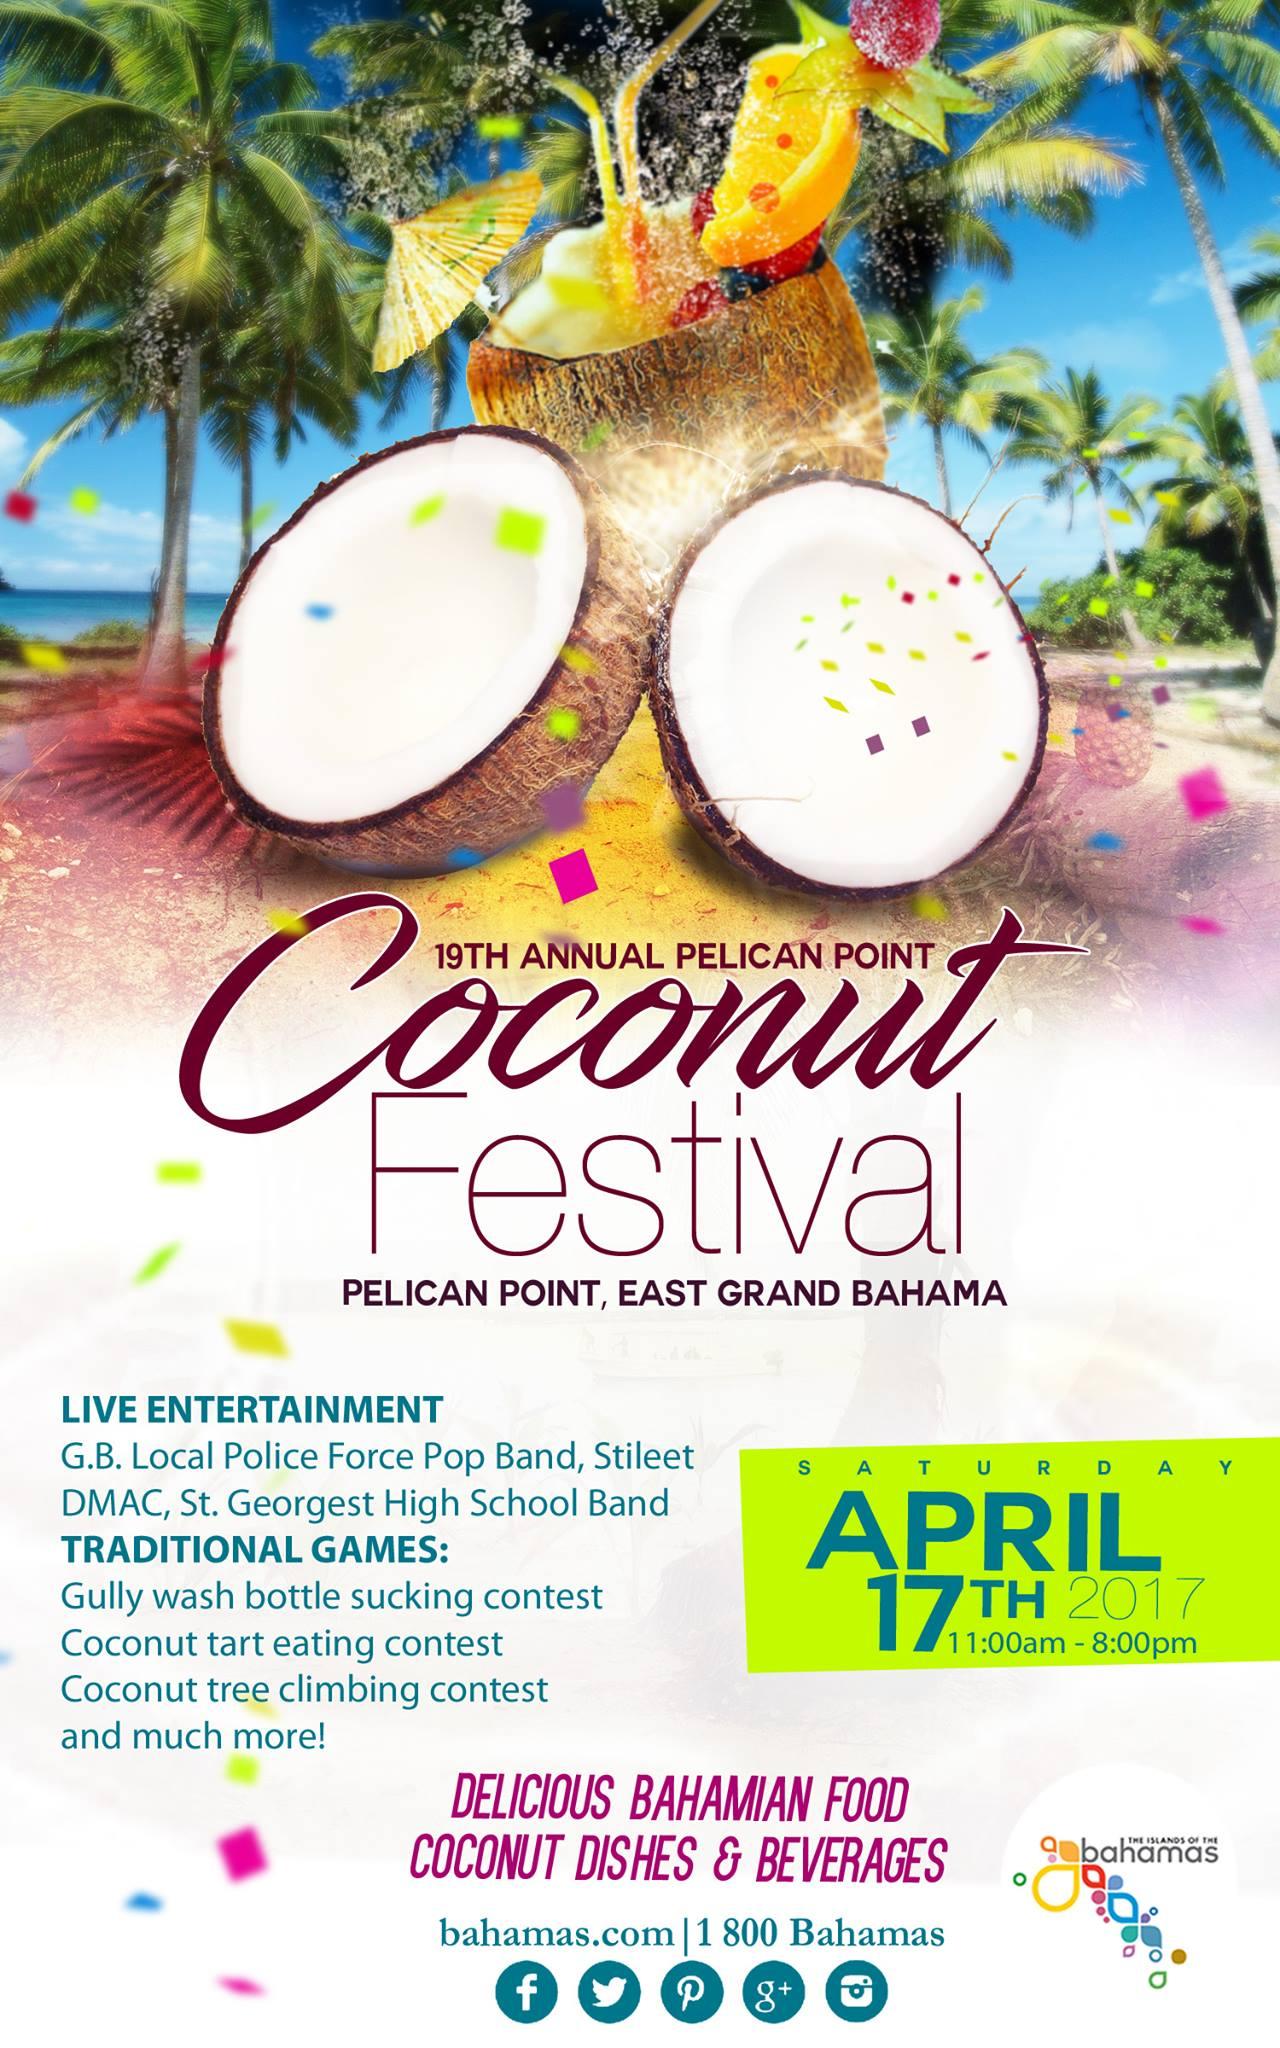 19th Annual Pelican Point Coconut Festival Tourism Today